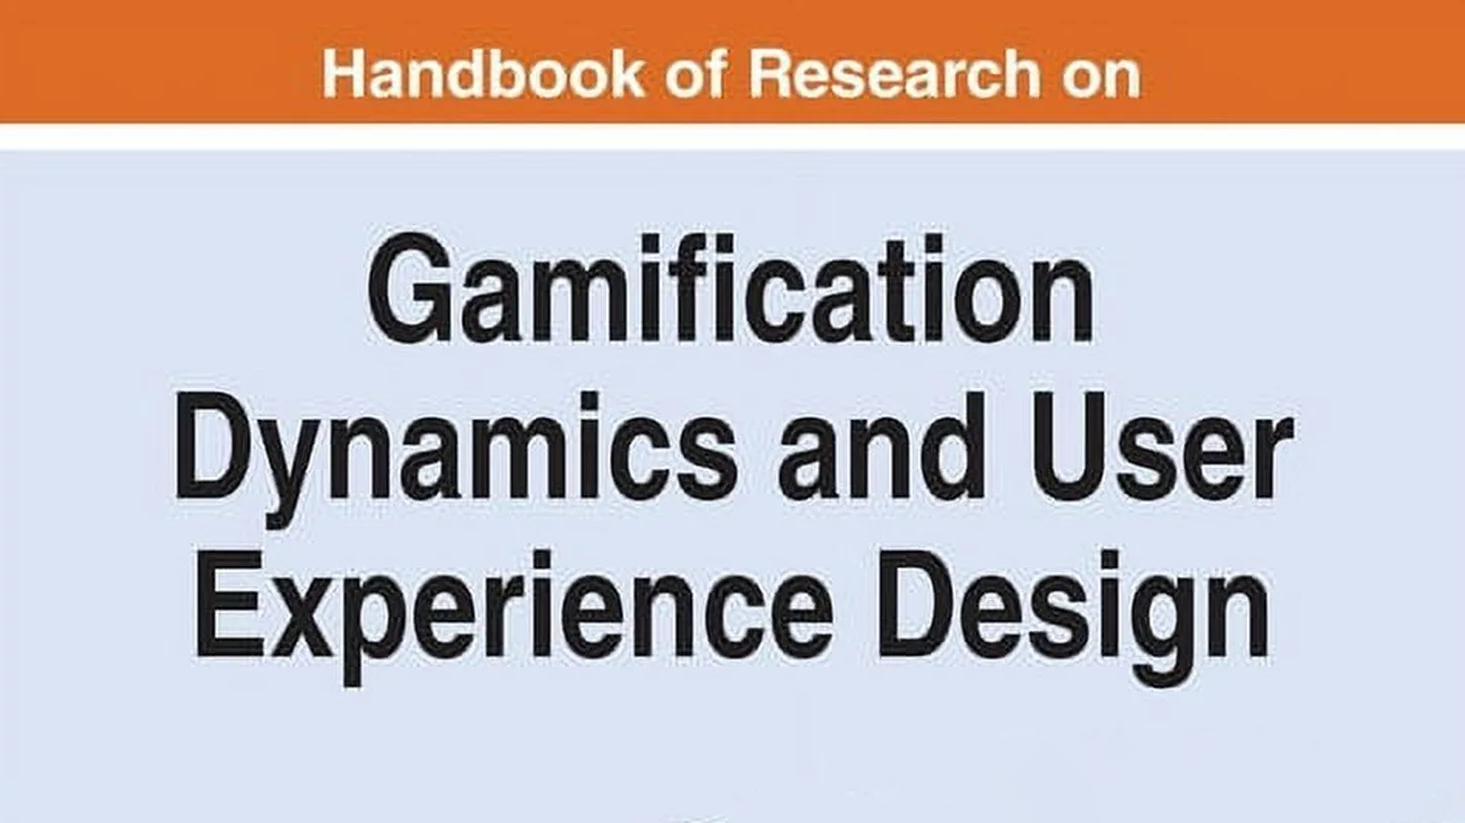 Featured Image for Senior Research Scientists Co-Author Chapter on Gamification